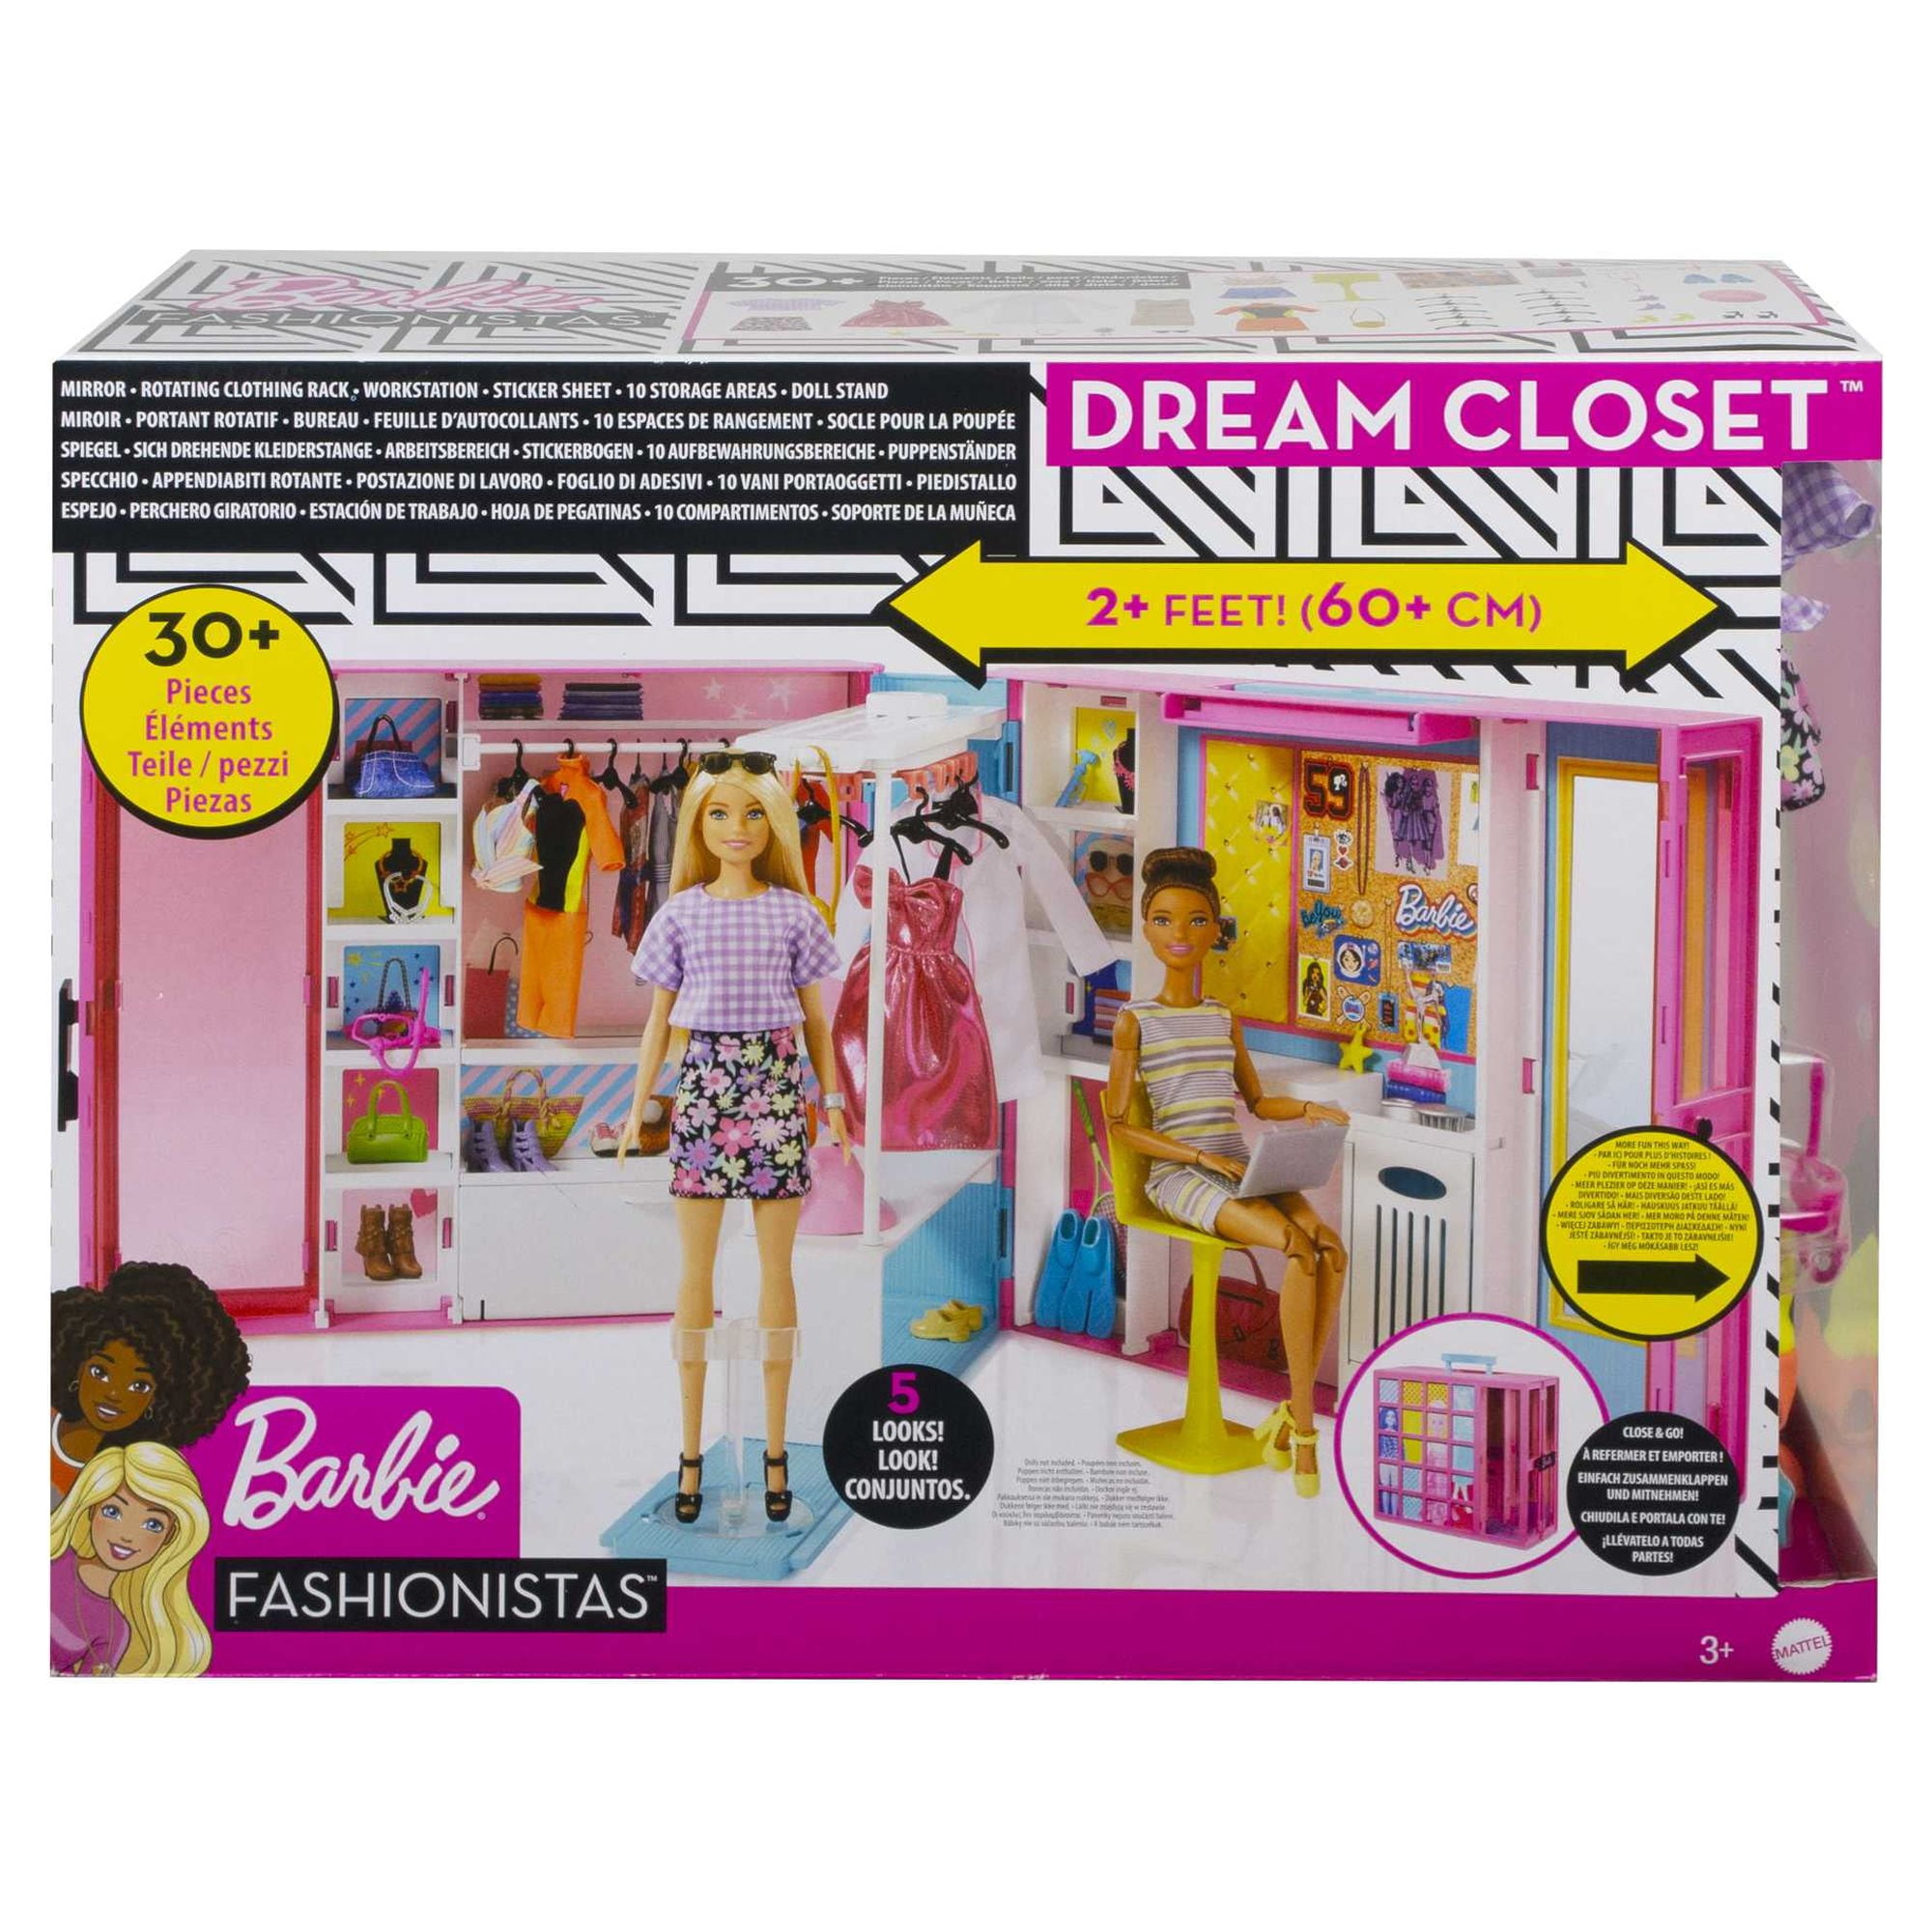 Store Barbie Clothes In A Toiletry/Makeup Organizer, Pearltrees